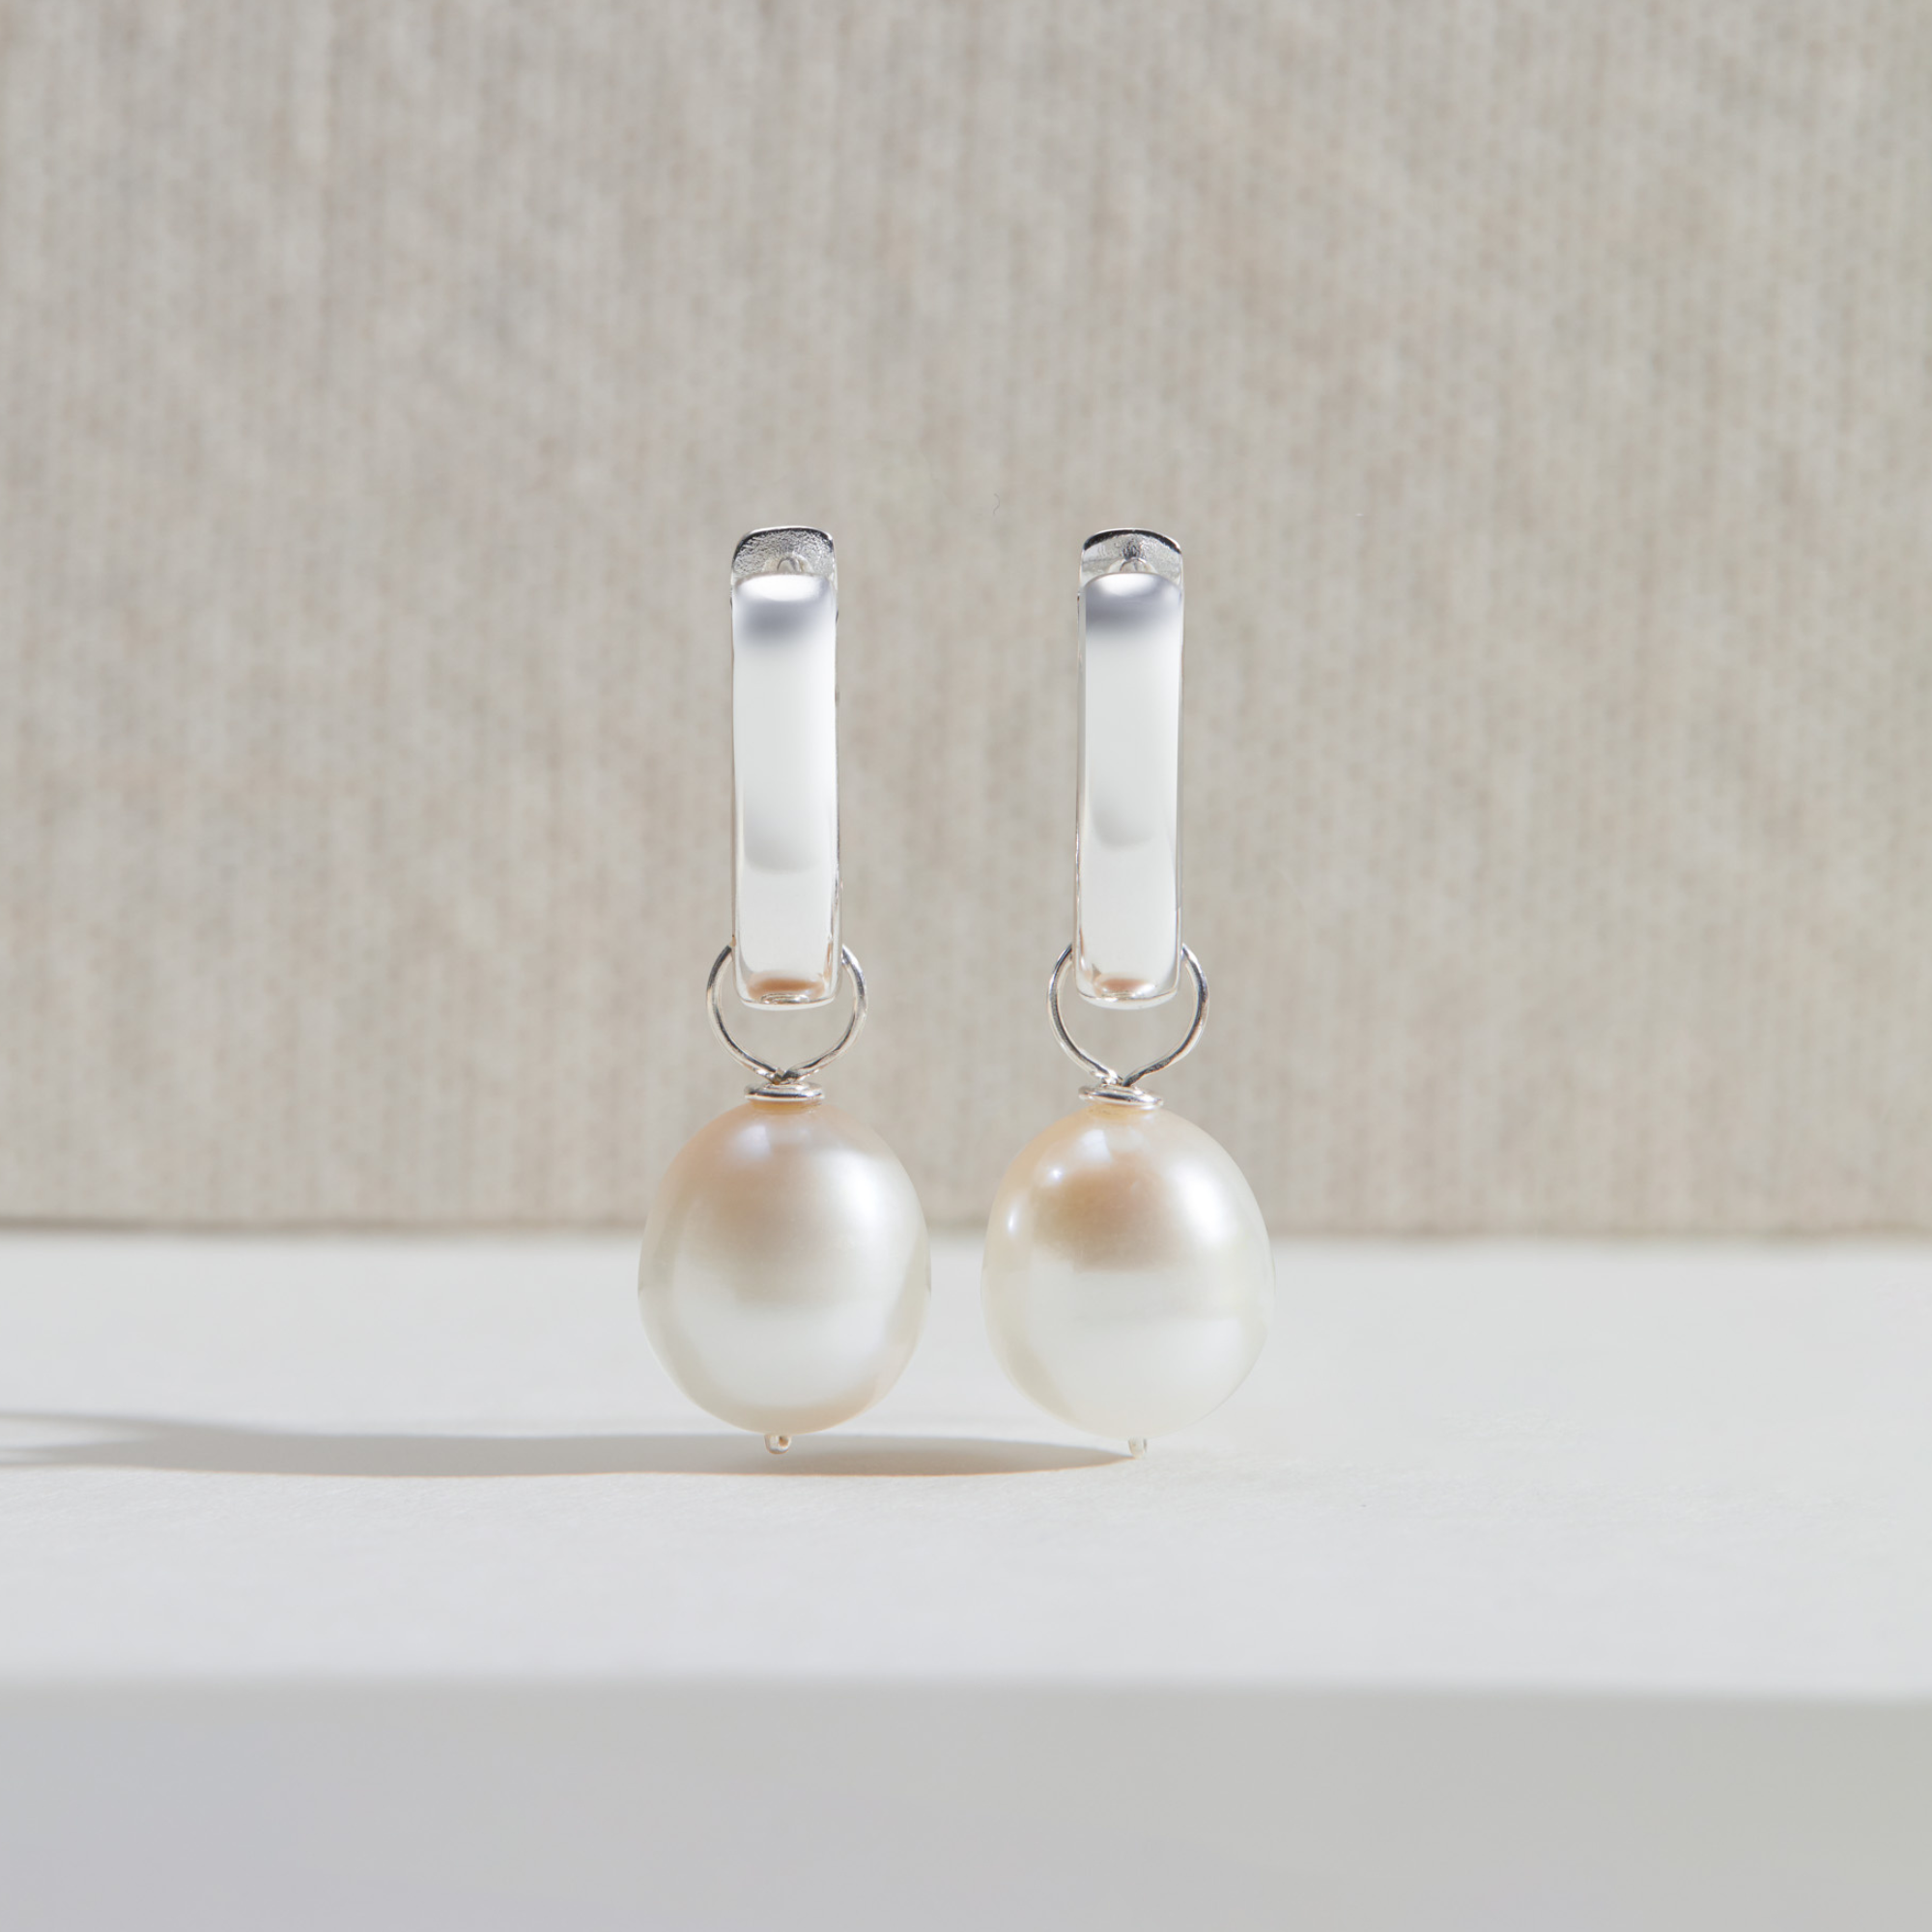 Two silver thick squared hoop pearl drop earrings upright on a white surface with a beige background